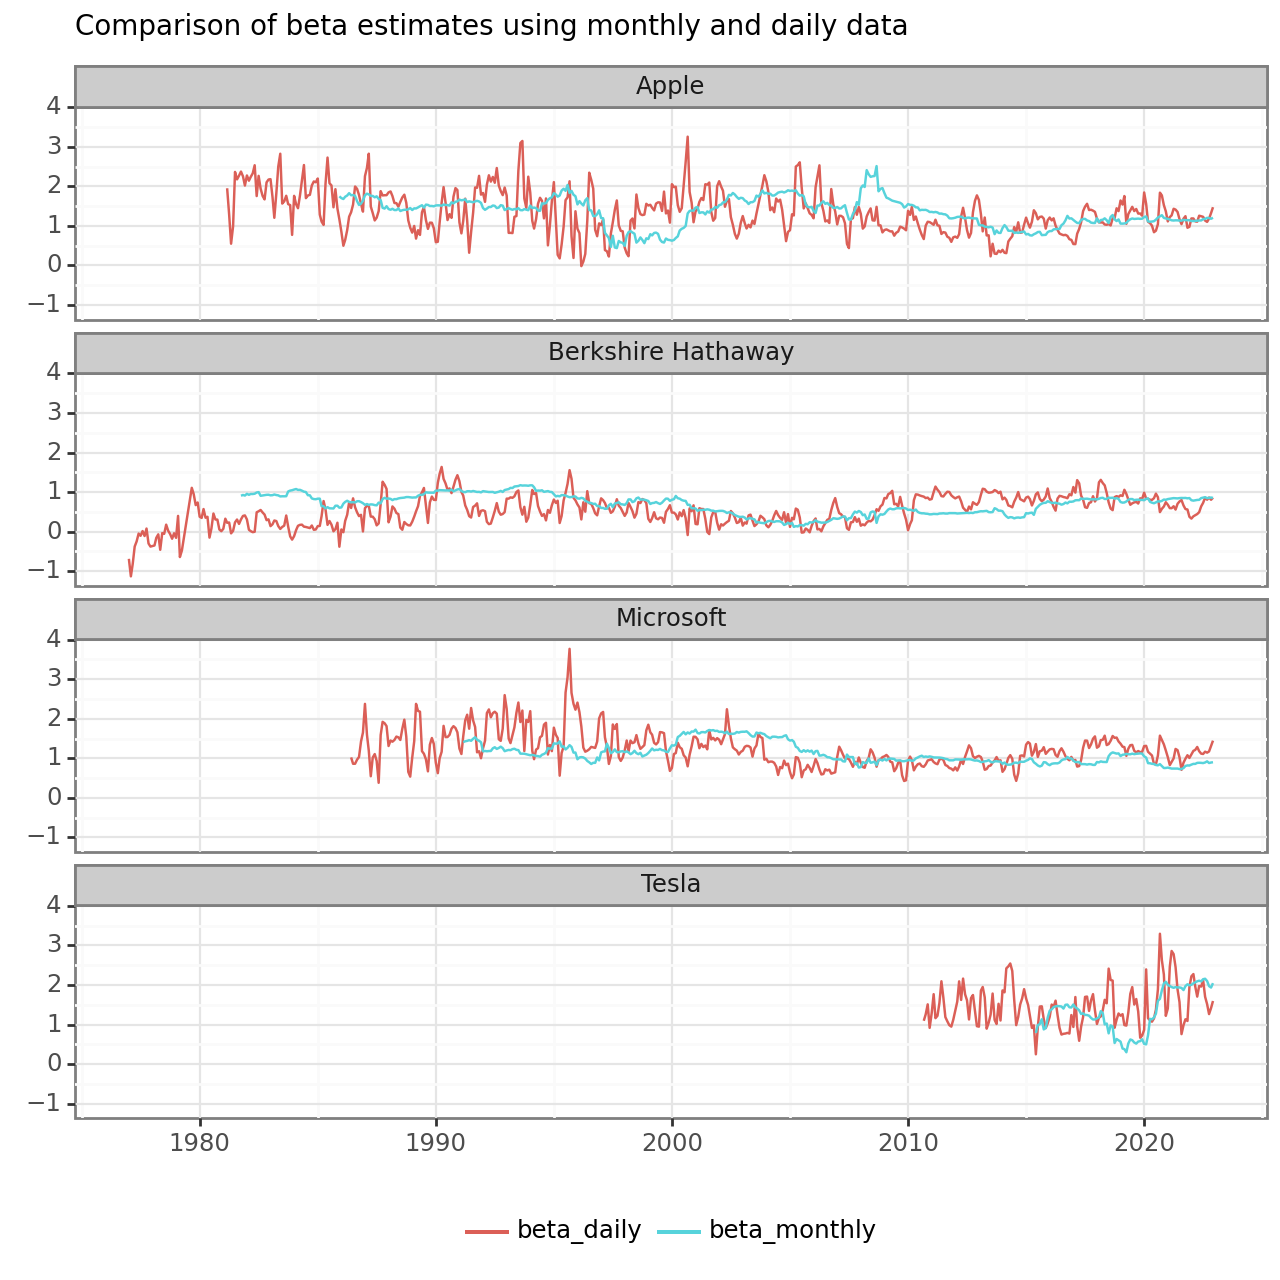 Title: Comparison of beta estimates using monthly and daily data. The figure shows a time series of beta estimates using 5 years of monthly versus 3 years of daily data for Apple, Berkshire Hathaway, Microsoft, and Tesla. The estimates based on longer periods of monthly data are smooth relative to the estimates based on daily data. However, the general trend and level is similar, irrespective of the choice of frequency.